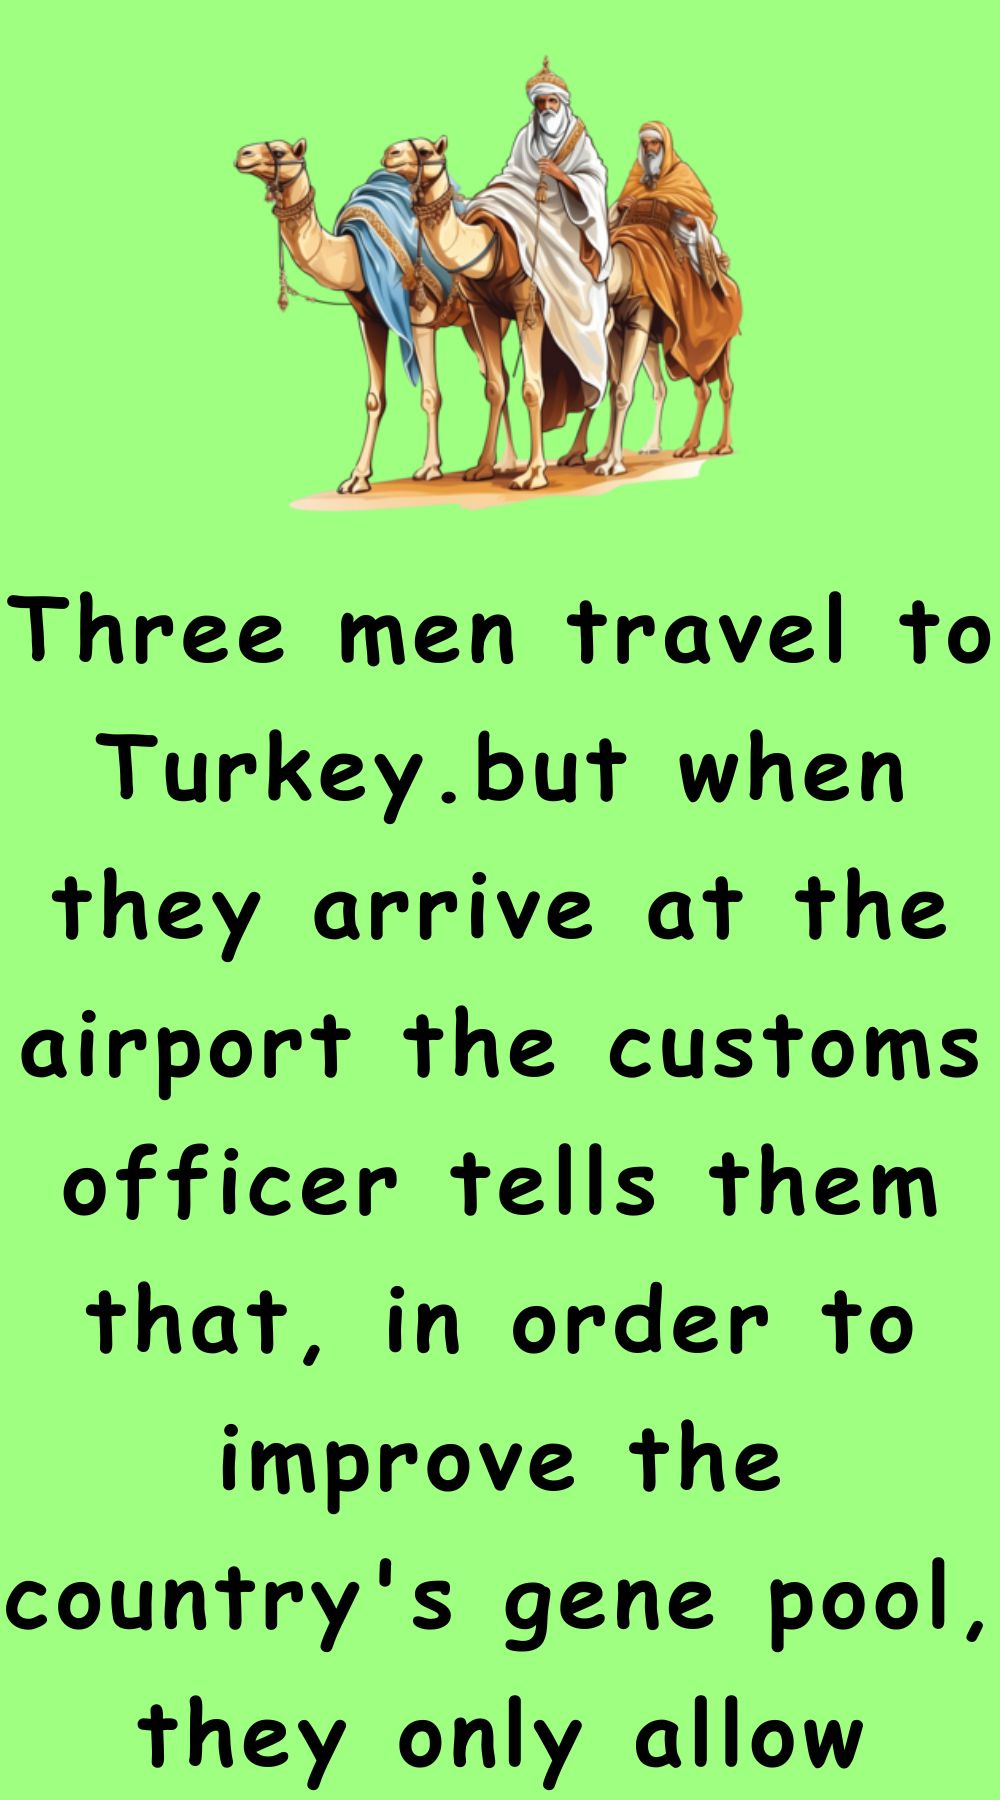 Three men travel to Turkey.but when they arrive at the airport the customs officer tells them that, in order to improve the country's gene pool, they only allow groups of men to enter the country if the combined length of their penises is at least 100 cm. So the first man gets undressed to take the measurement. The officers measure his penis is 50 centimeters long. The second man does the same. His penis is 49 centimeters long. Then the third man gets undressed. His penis is just barely 1 centimeter long. So although it's not by a great margin, the combined length of their penises is at least 100 cm, so the officers let the 3 men into the country. Three men travel to Turkey